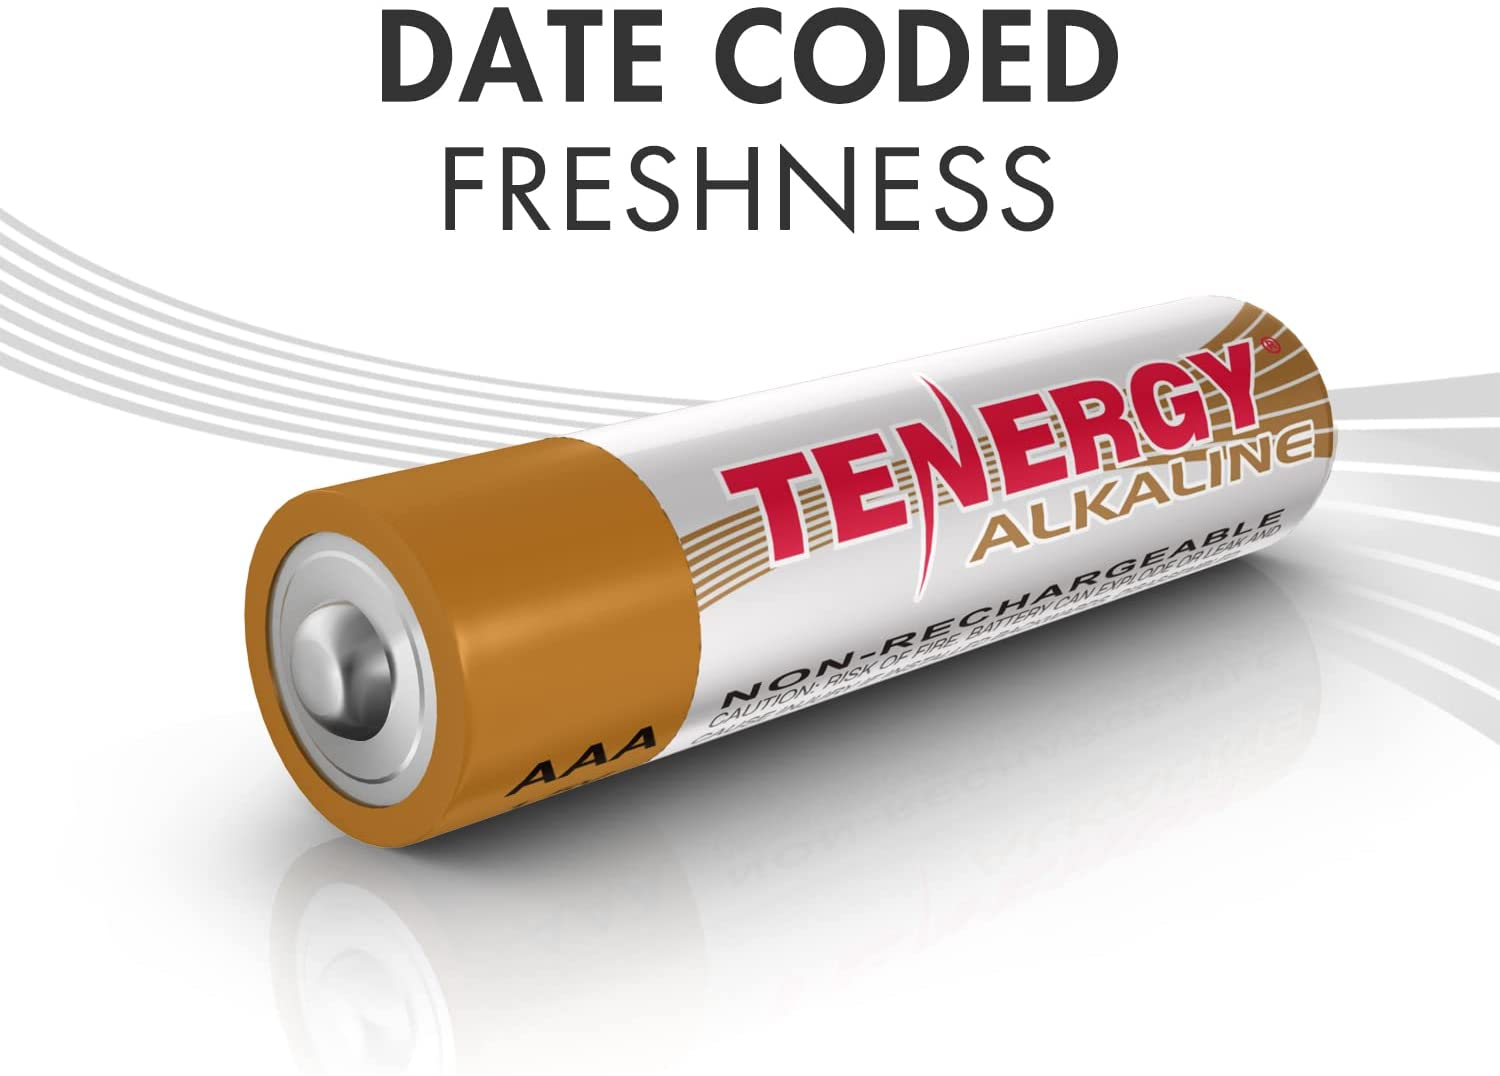 Tenergy 1.5V AAA Alkaline Battery, High Performance AAA Non-Rechargeable Batteries for Clocks, Remotes, Toys & Electronic Devices, Replacement AAA Cell Batteries, 100 Pack